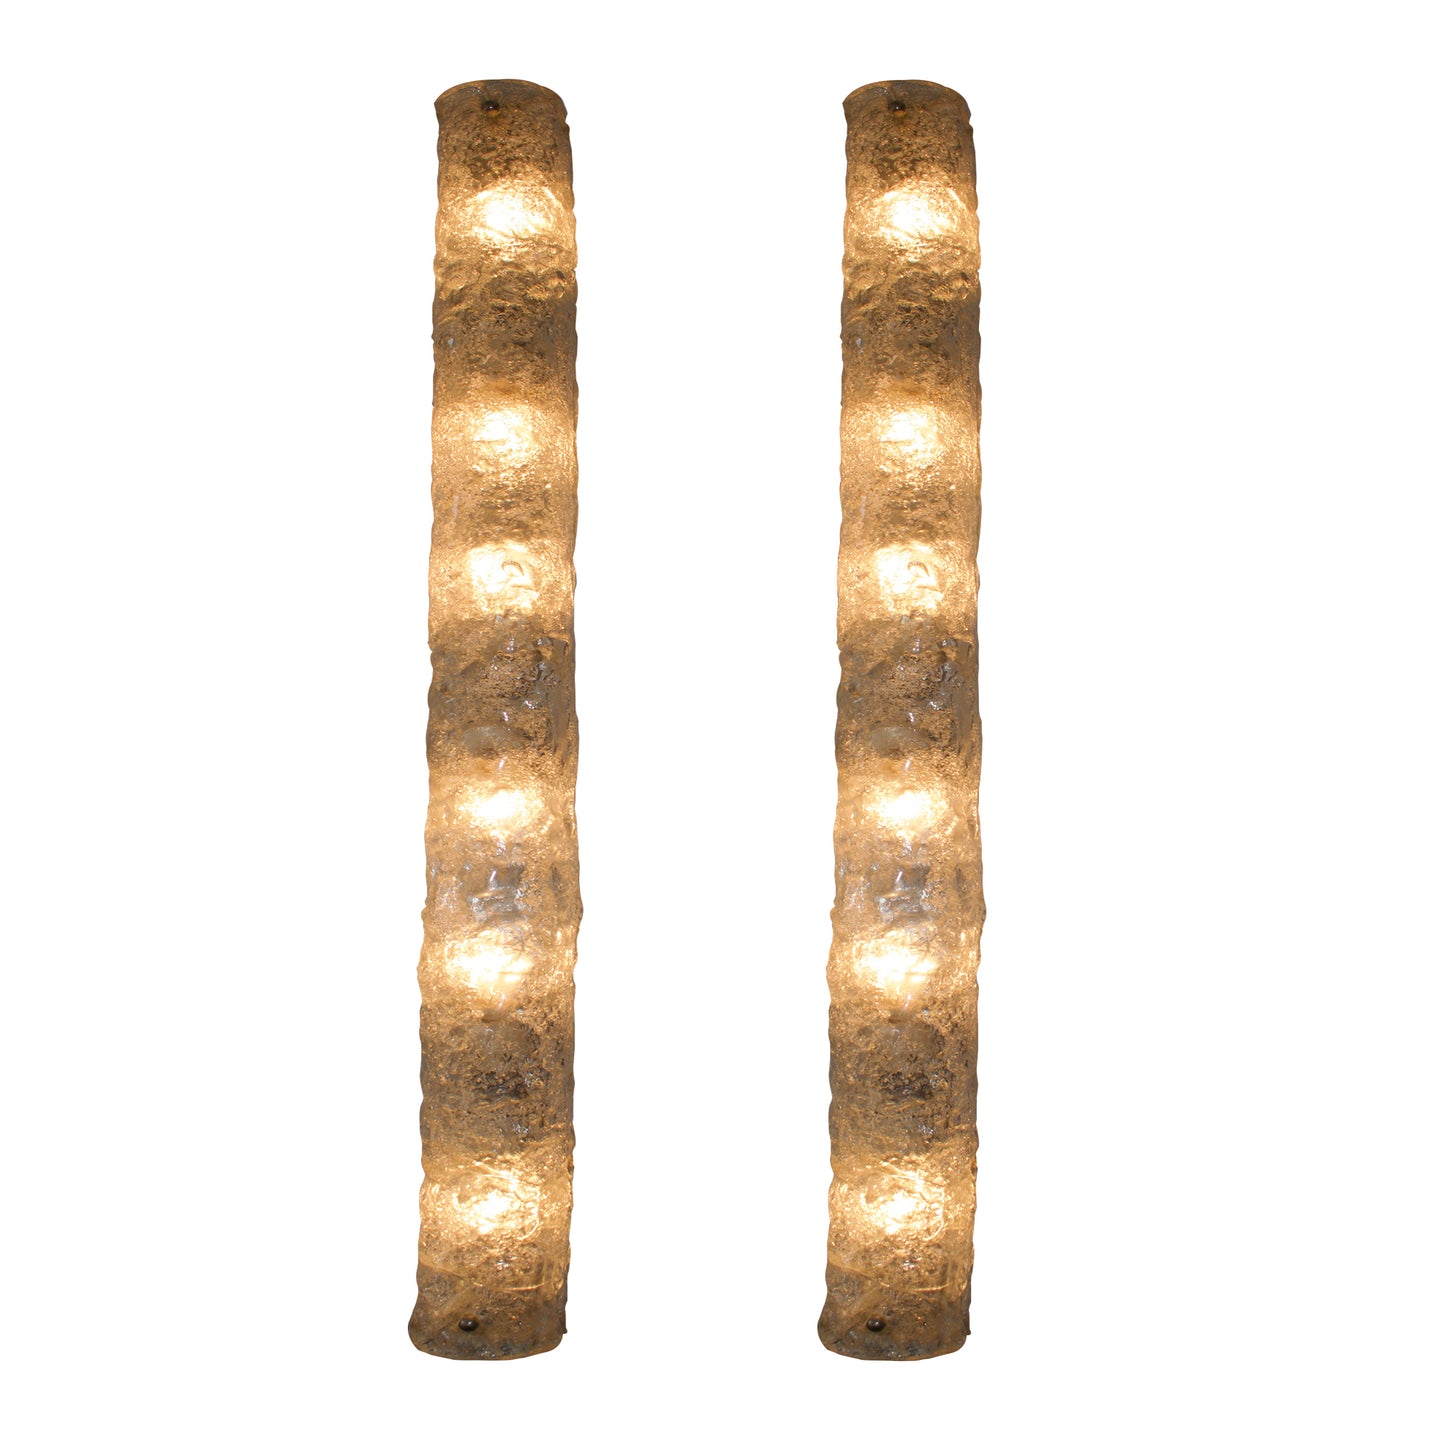 1960s Long Icicle Textured Glass Wall Lights On a Chrome Frame by Hillbrand, Germany